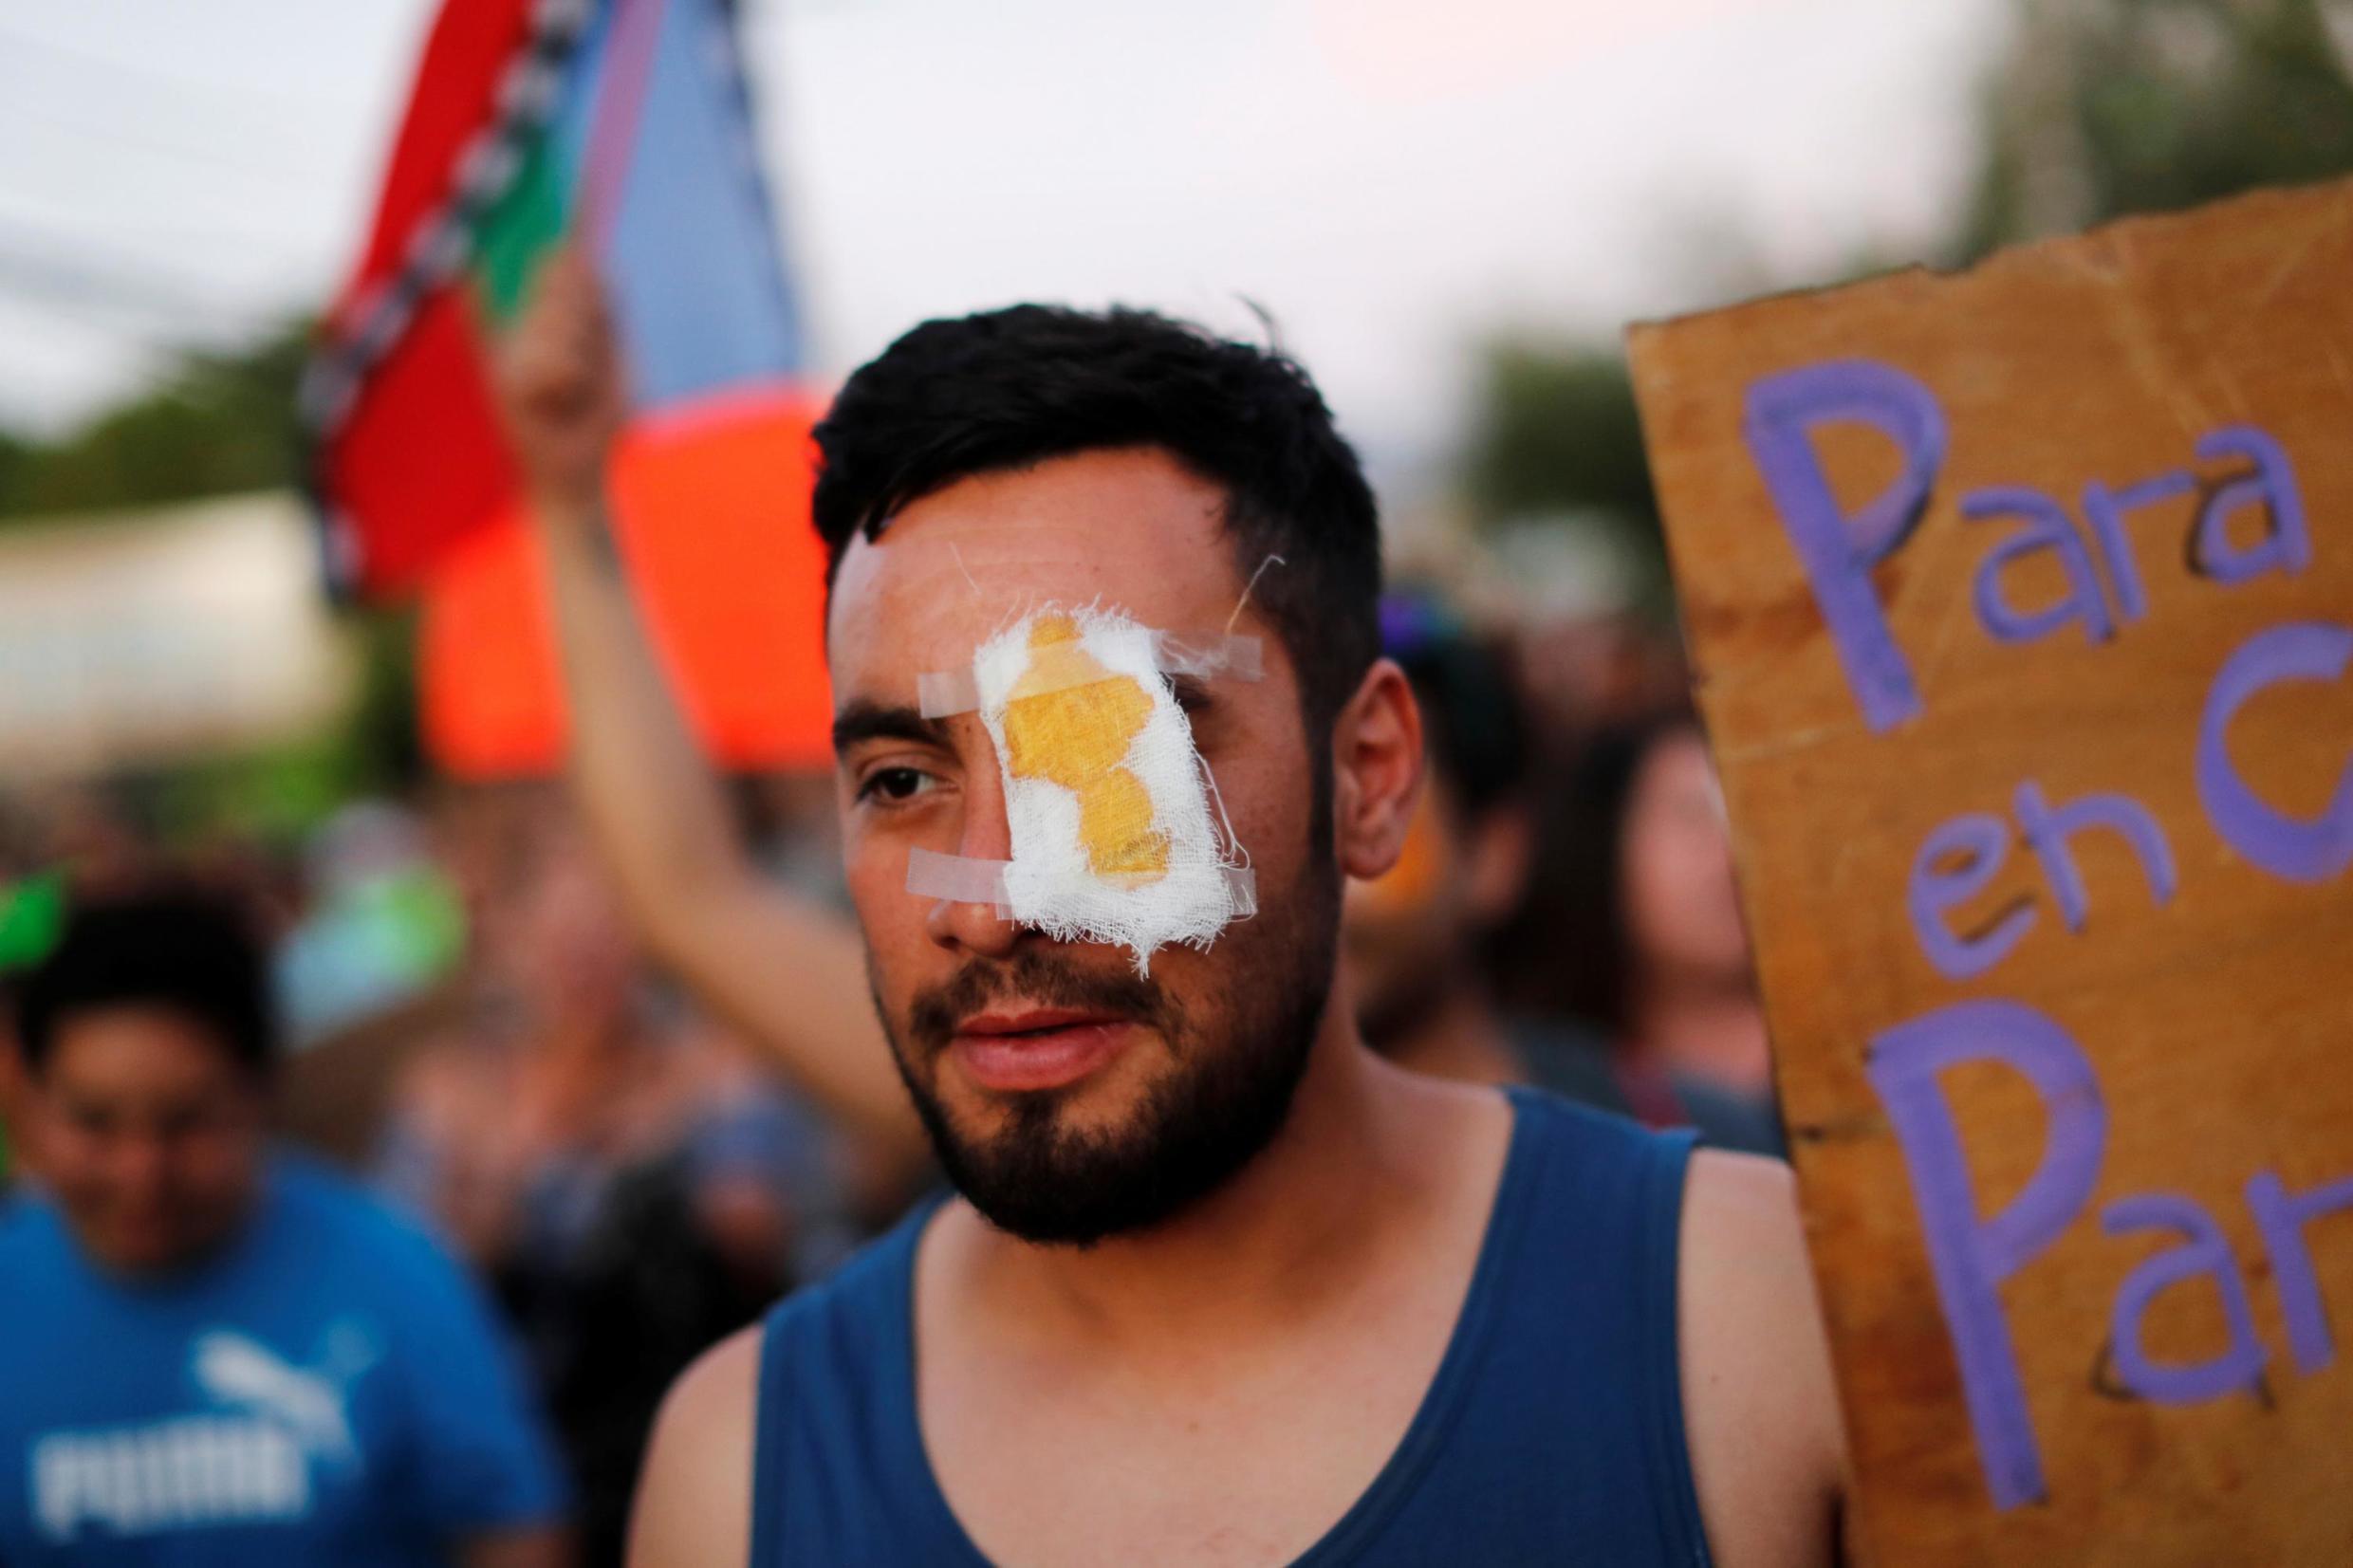 La Colina, Chile, November 10, 2019: a protester wears an eyepatch in solidarity with Gustavo Gatica, a student who lost his sight completely after being injured by police shooting on November 8, 2019 during of a demonstration in Santiago,